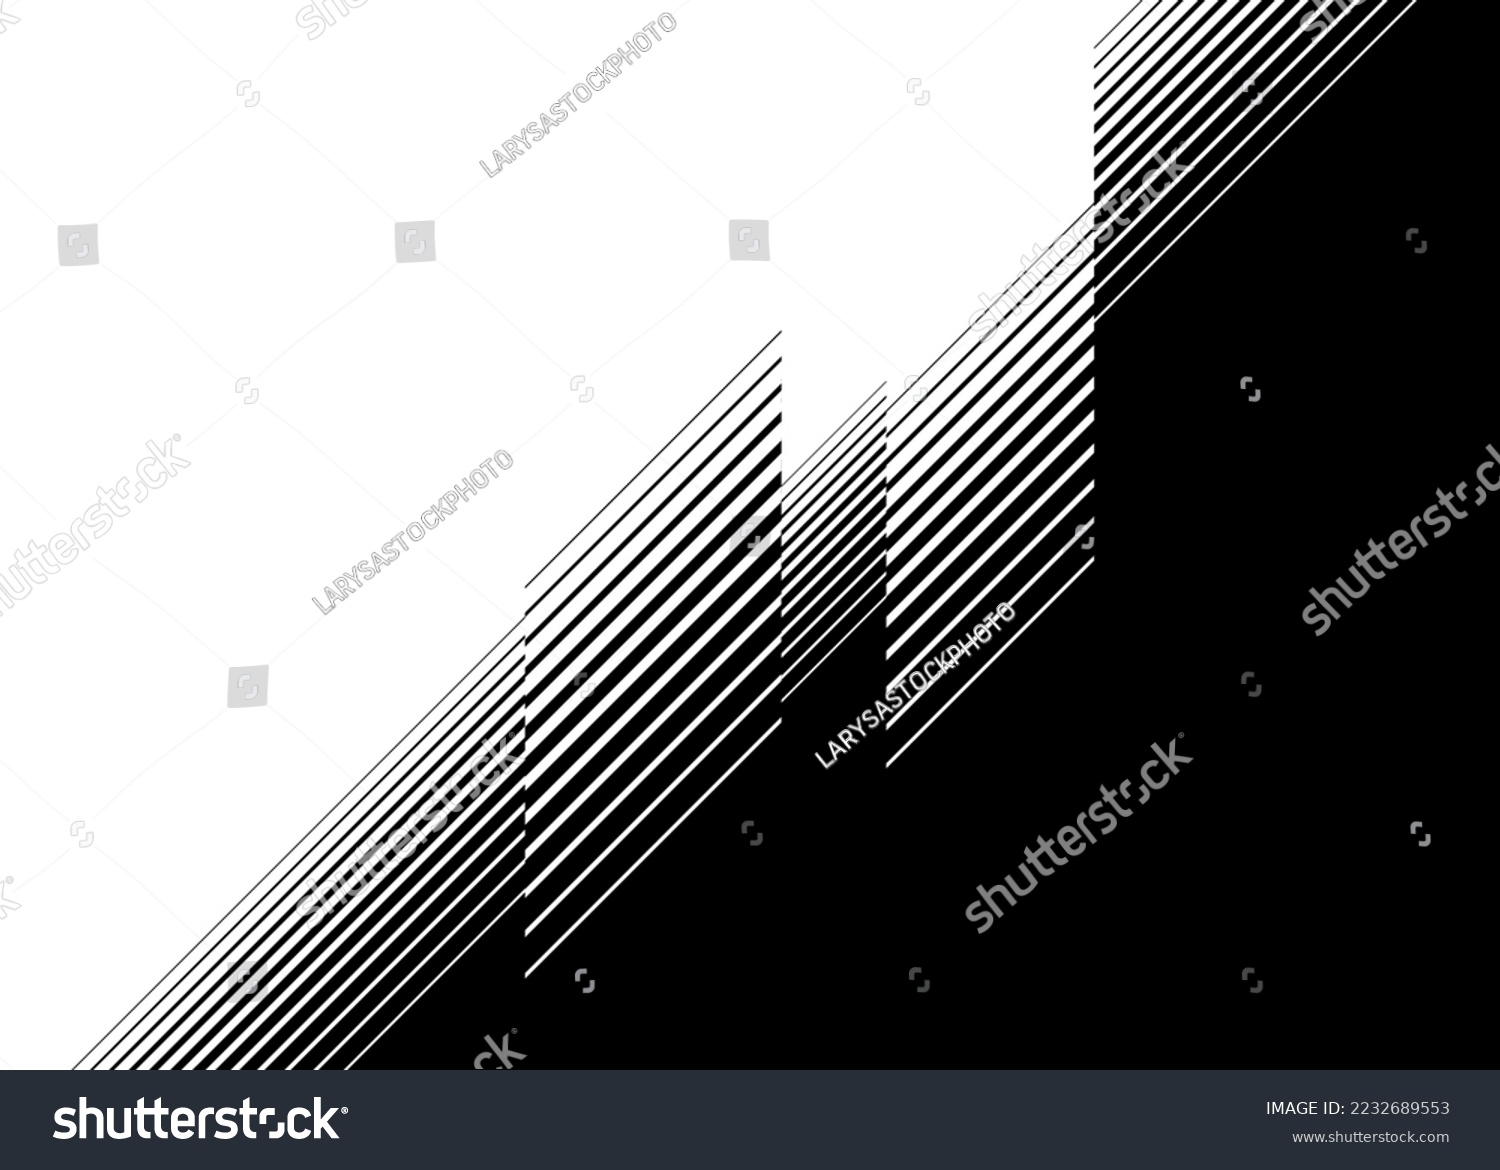 SVG of Smooth vector transition from black to white. Abstract broken stripes. For wall design, interior, polygraphy, clothing, web.Striped pattern, Trendy vector background. svg